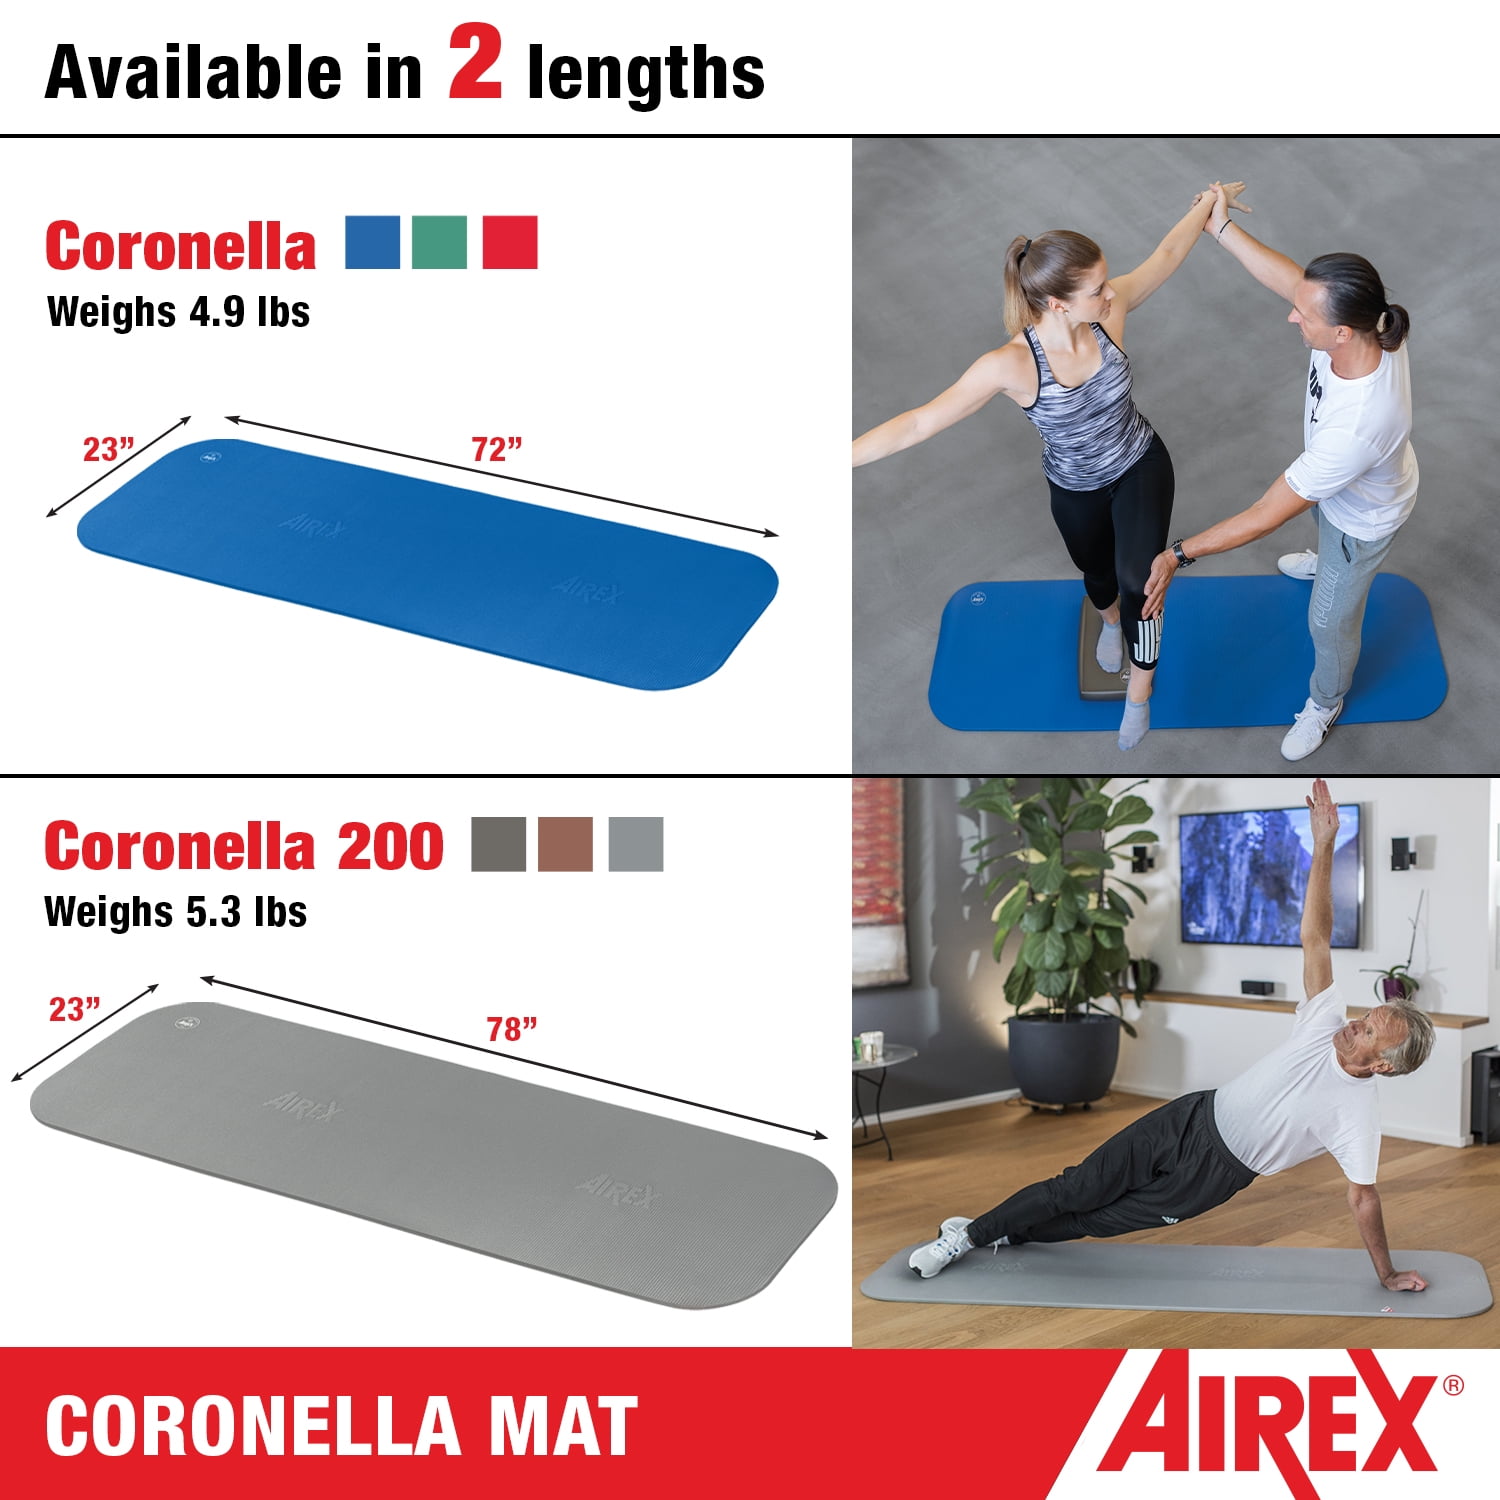 72 x 23 x 5/8 Gym Floor Blue Yoga Airex Coronella Workout Exercise Mat for Fitness Pilates